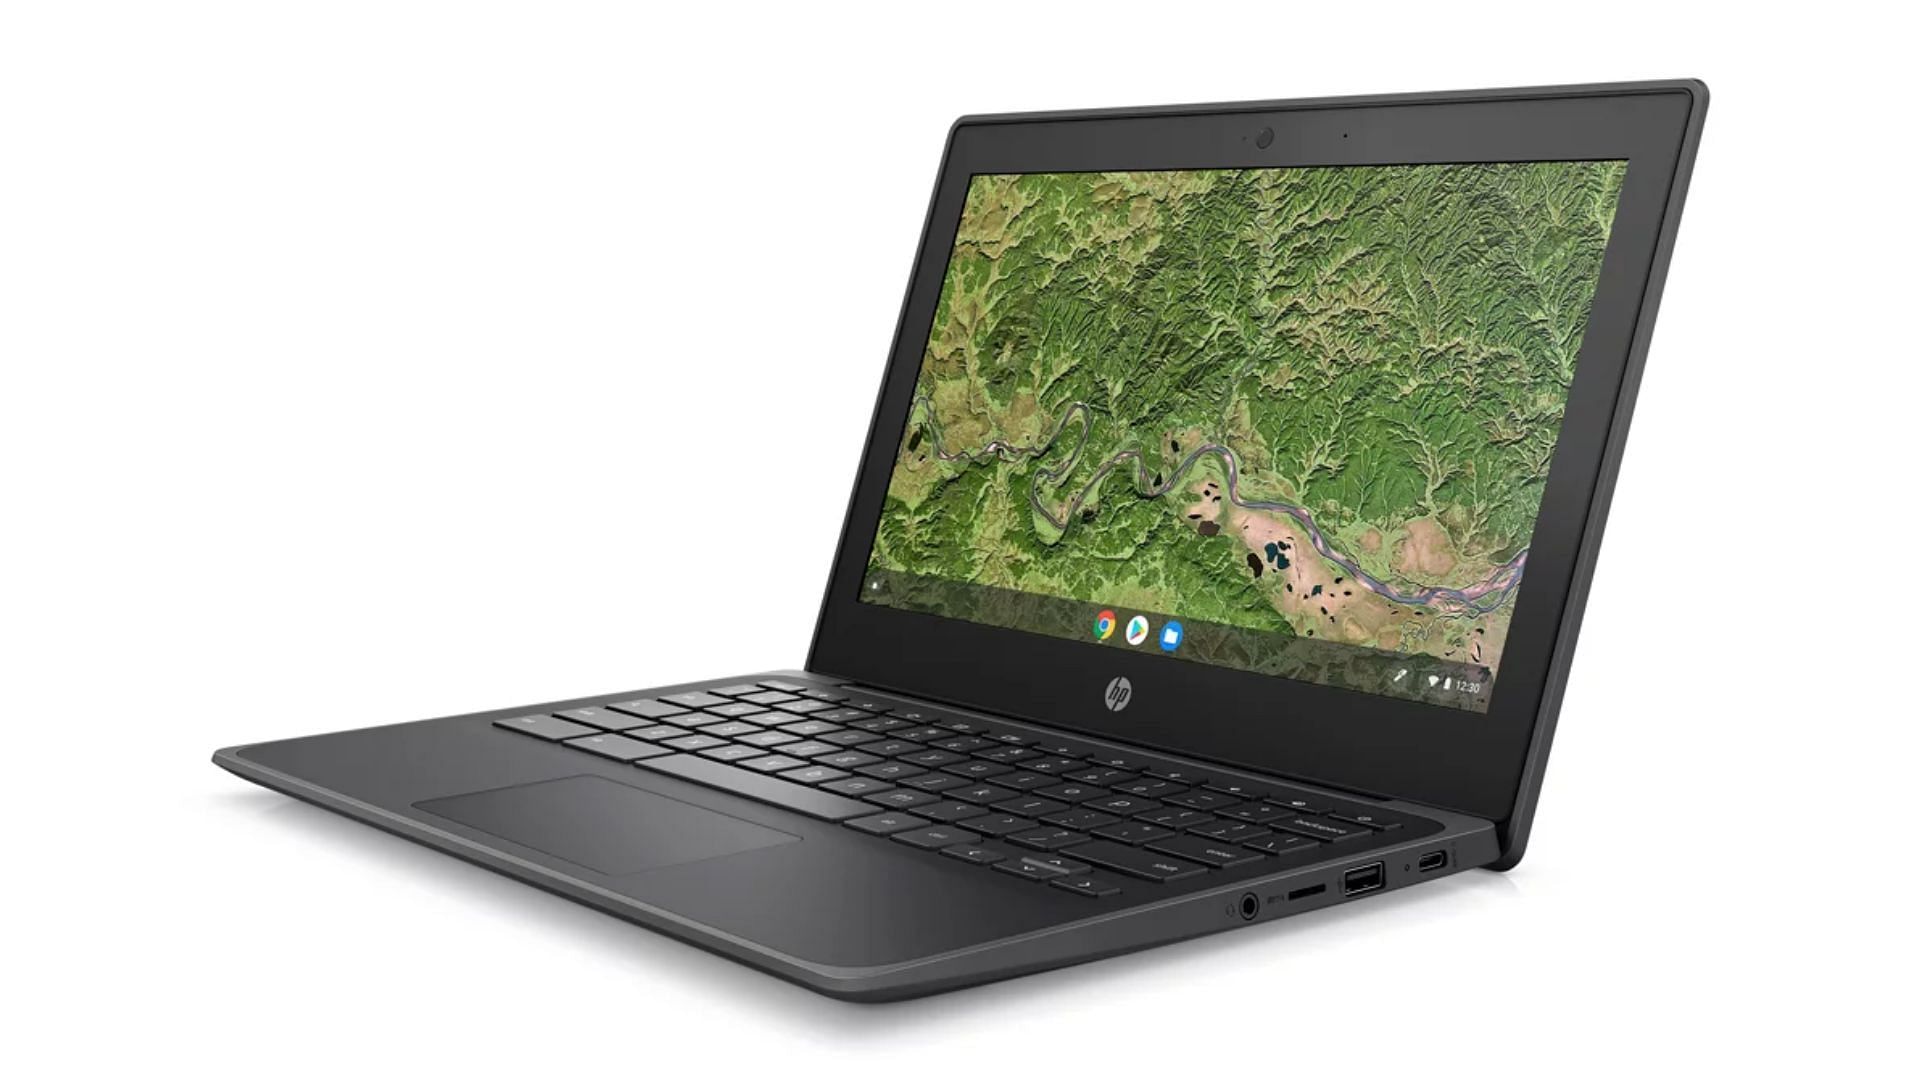 This HP Chromebook is available for less than $100 this Black Friday (Image via Walmart)